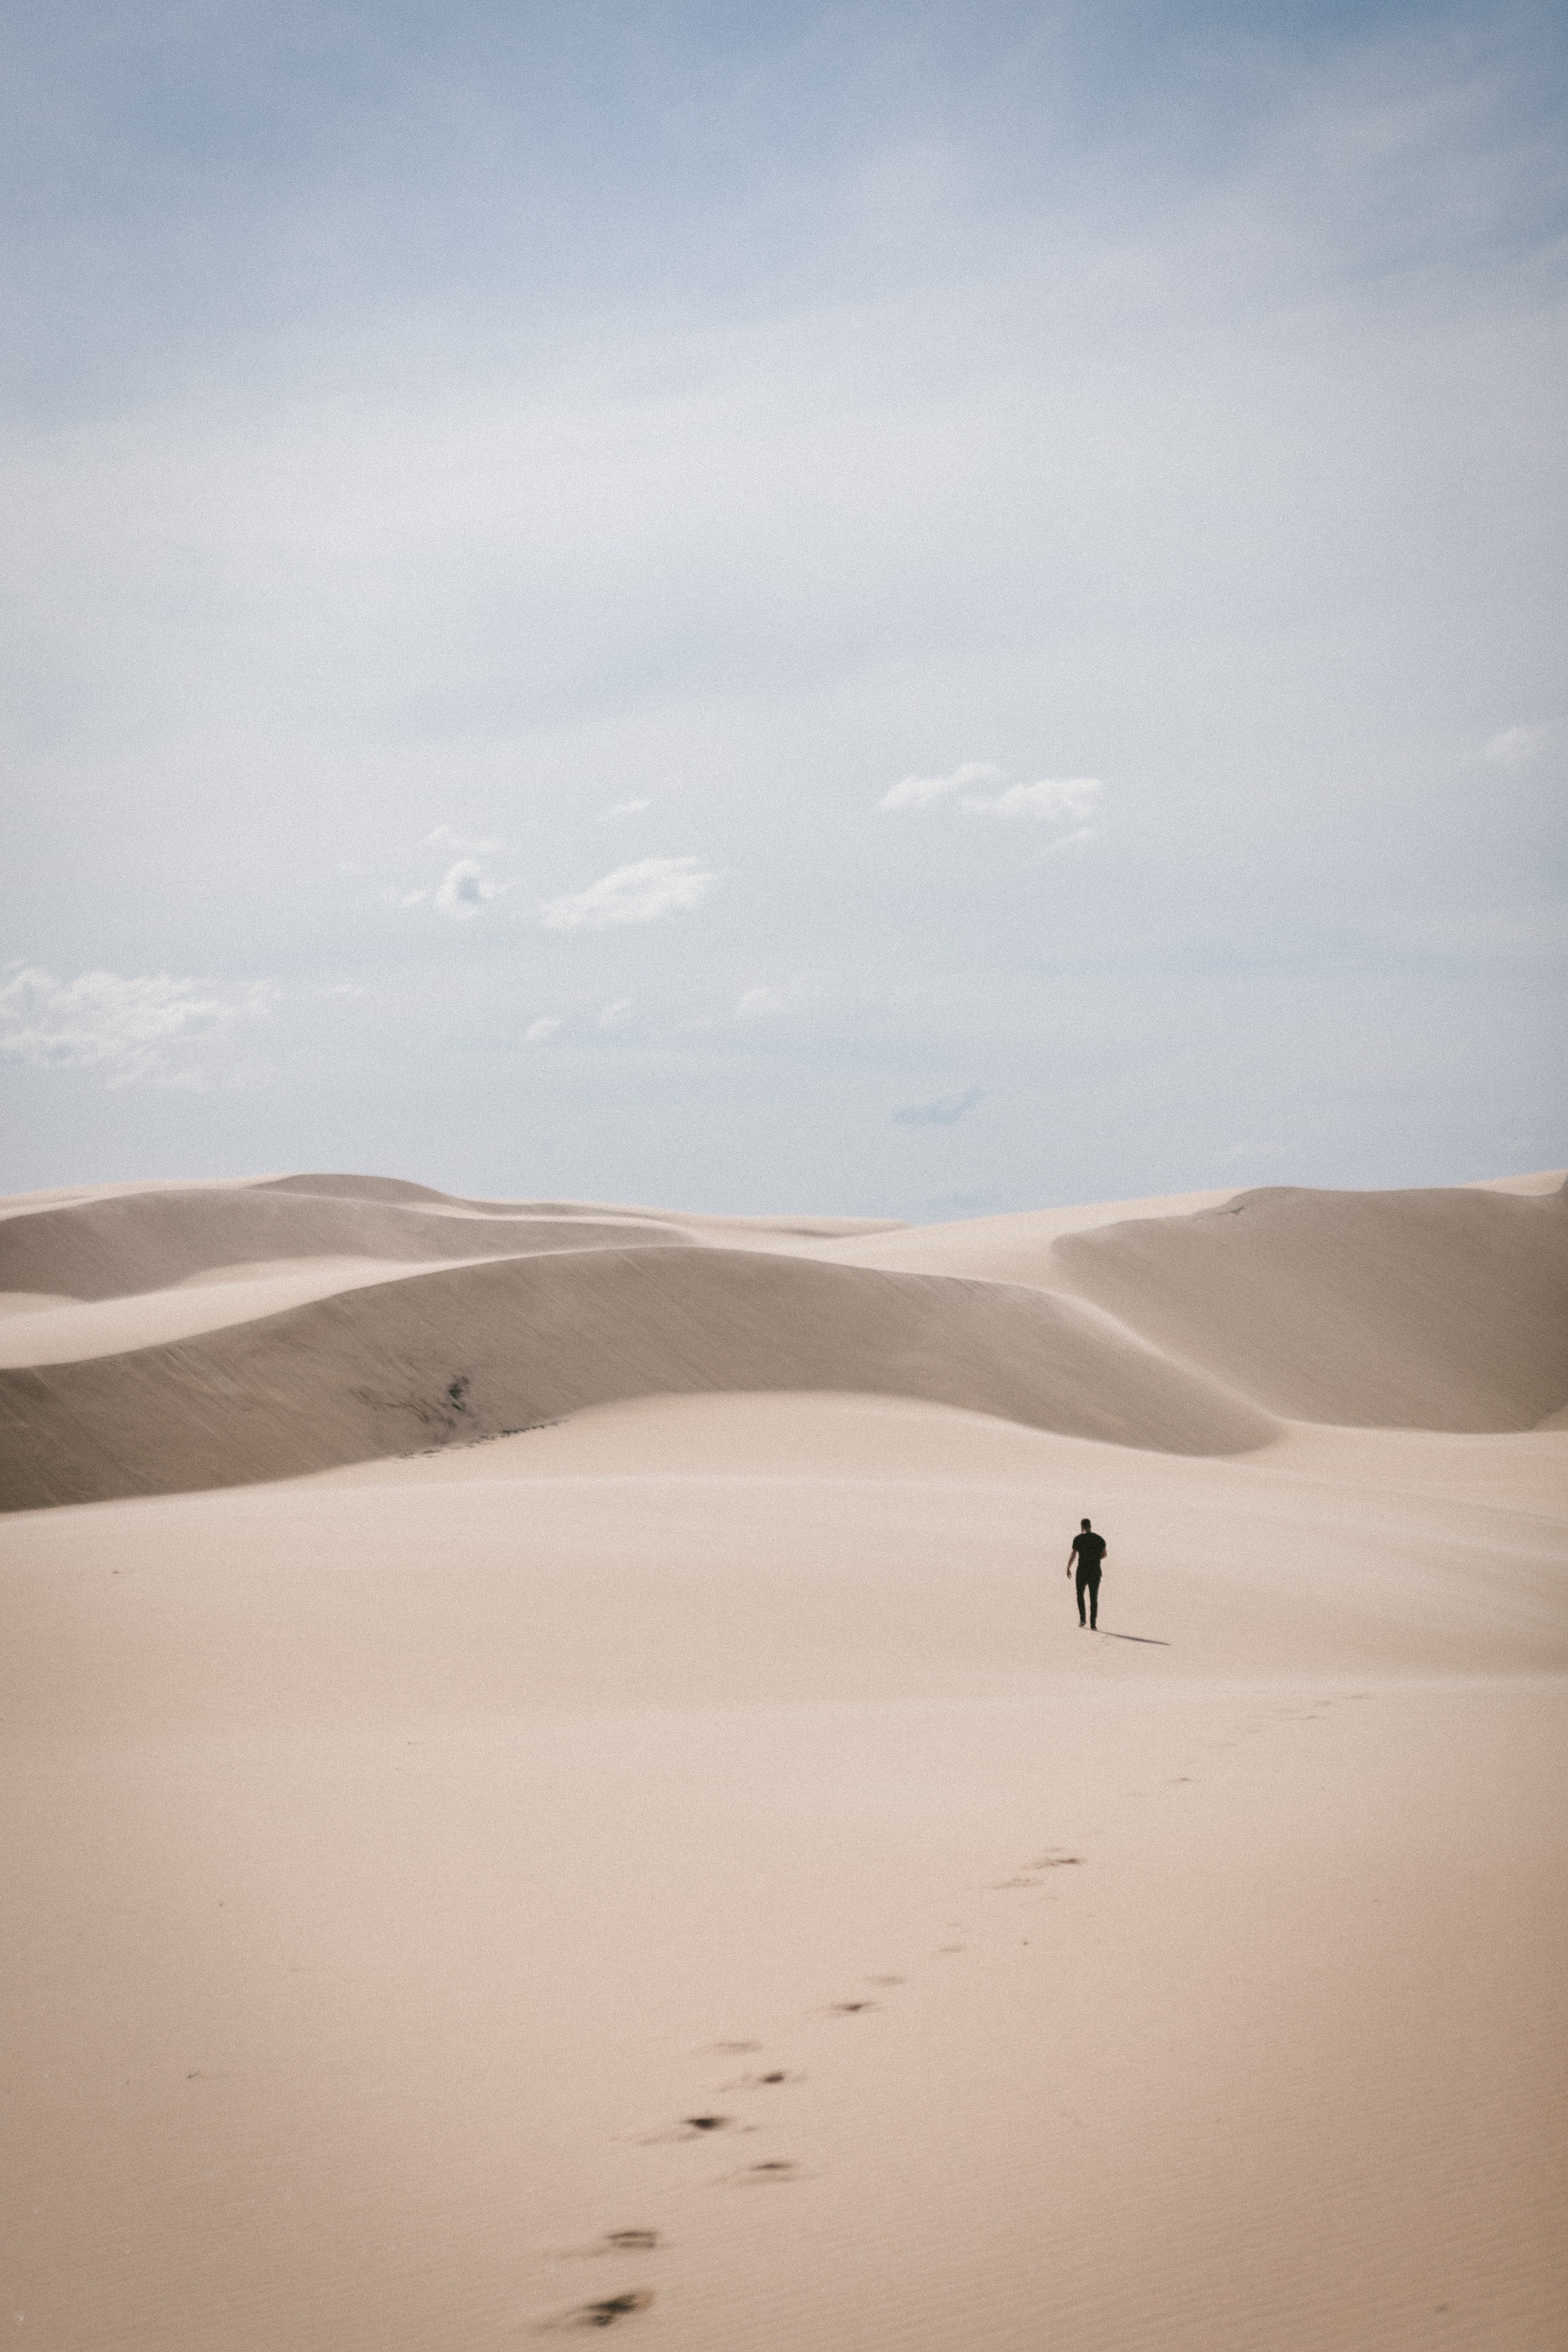 #3648x5472 Dune Sand Dune Sand And Footprint Hd Wallpaper - Lonely Man In Desert , HD Wallpaper & Backgrounds